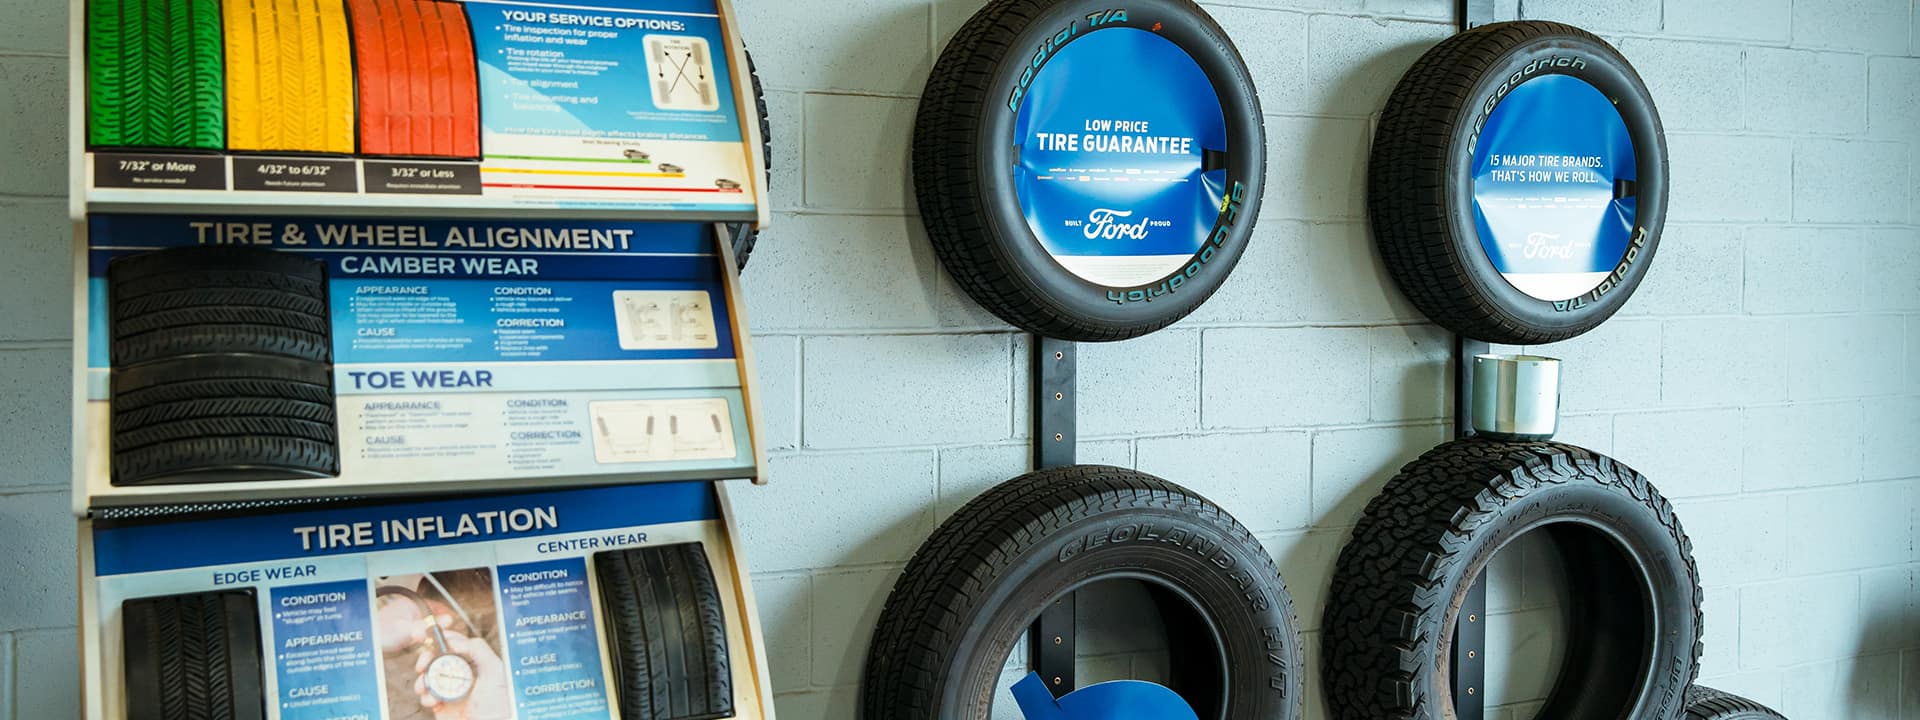 Different types of tires mounted on a wall next to tire information